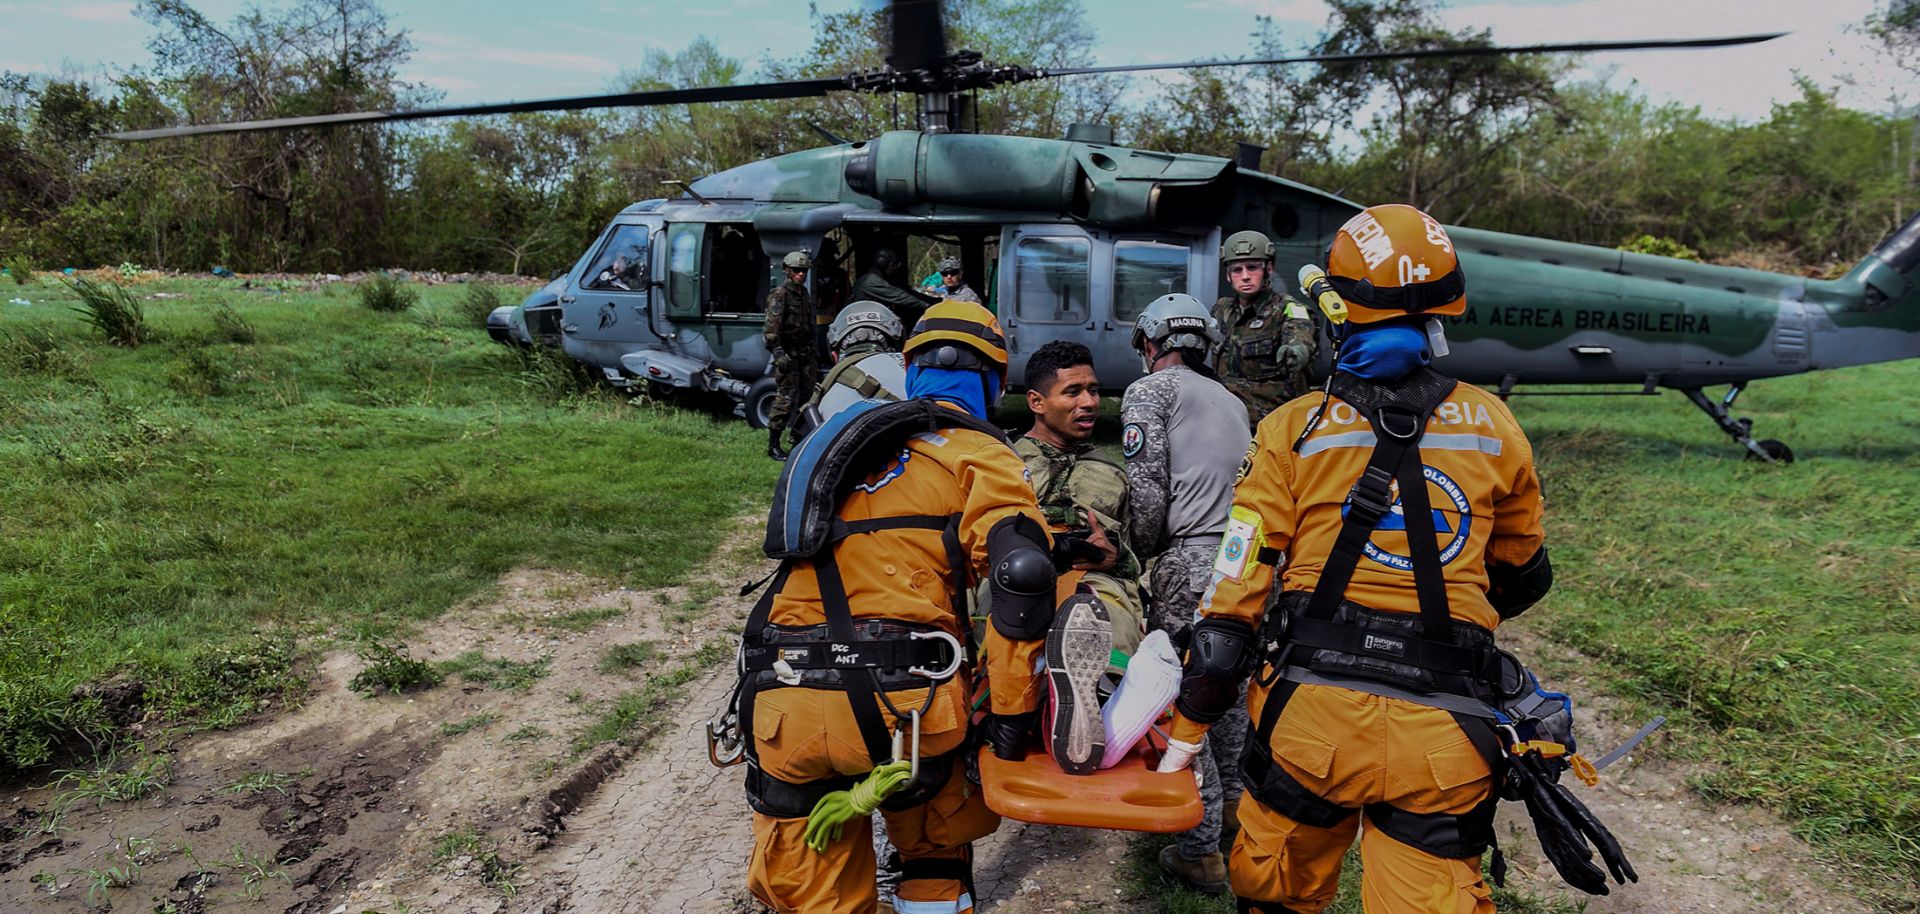 A Colombian rescue crew evacuates a "victim" in a Brazilian air force helicopter during an earthquake simulation exercise conducted by air force members at the Palenquero base in Puerto Salgar, Colombia, on Sept. 6, 2018.